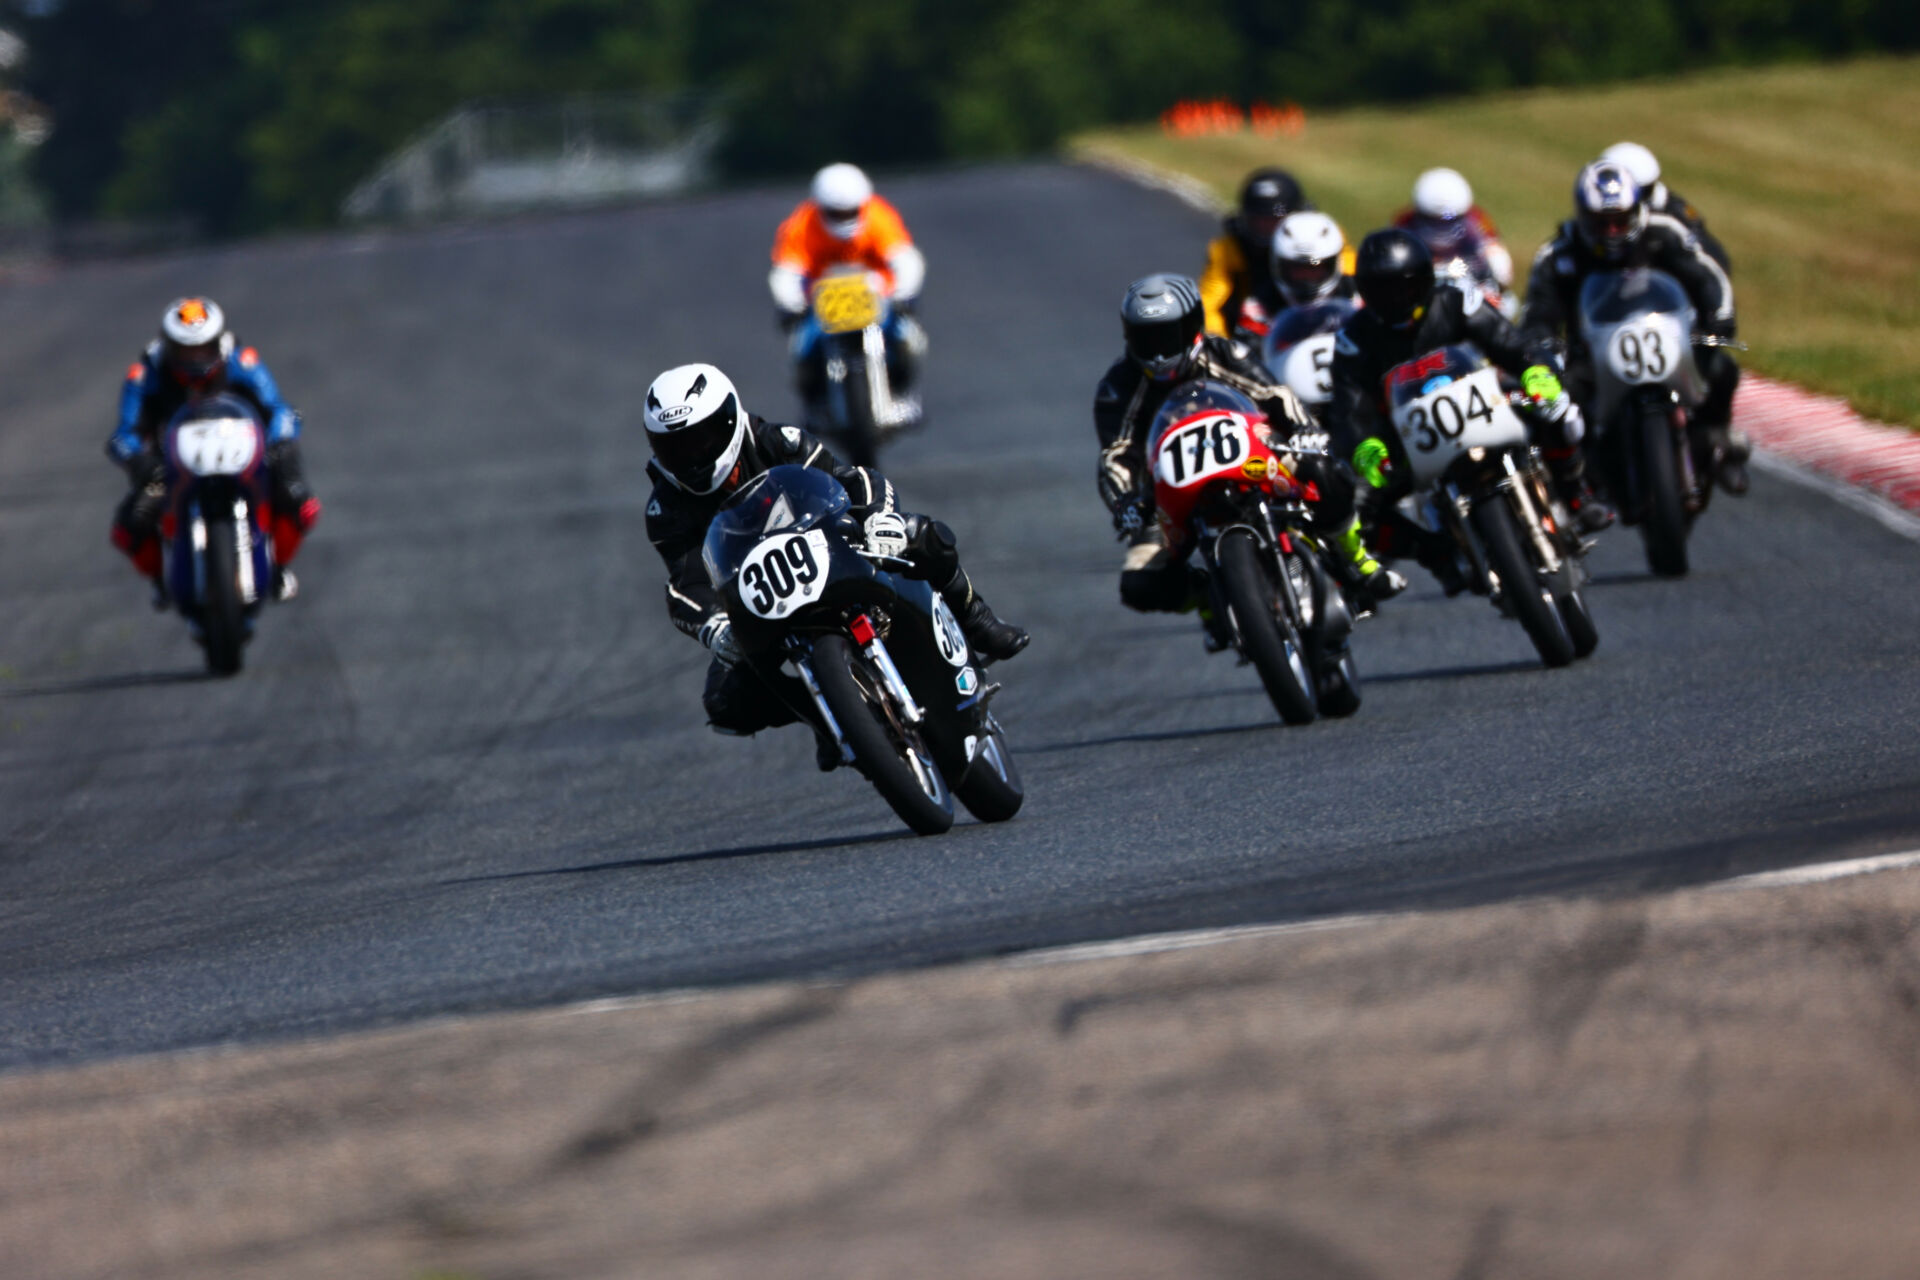 Tim Joyce (309) leads Tony Read (176), Kevin Dinsmoor (304), Daniel May (93), Dan Sokolich (77Z), and the rest during an AHRMA Vintage Cup race at NJMP. Photo by etechphoto.com, courtesy AHRMA.